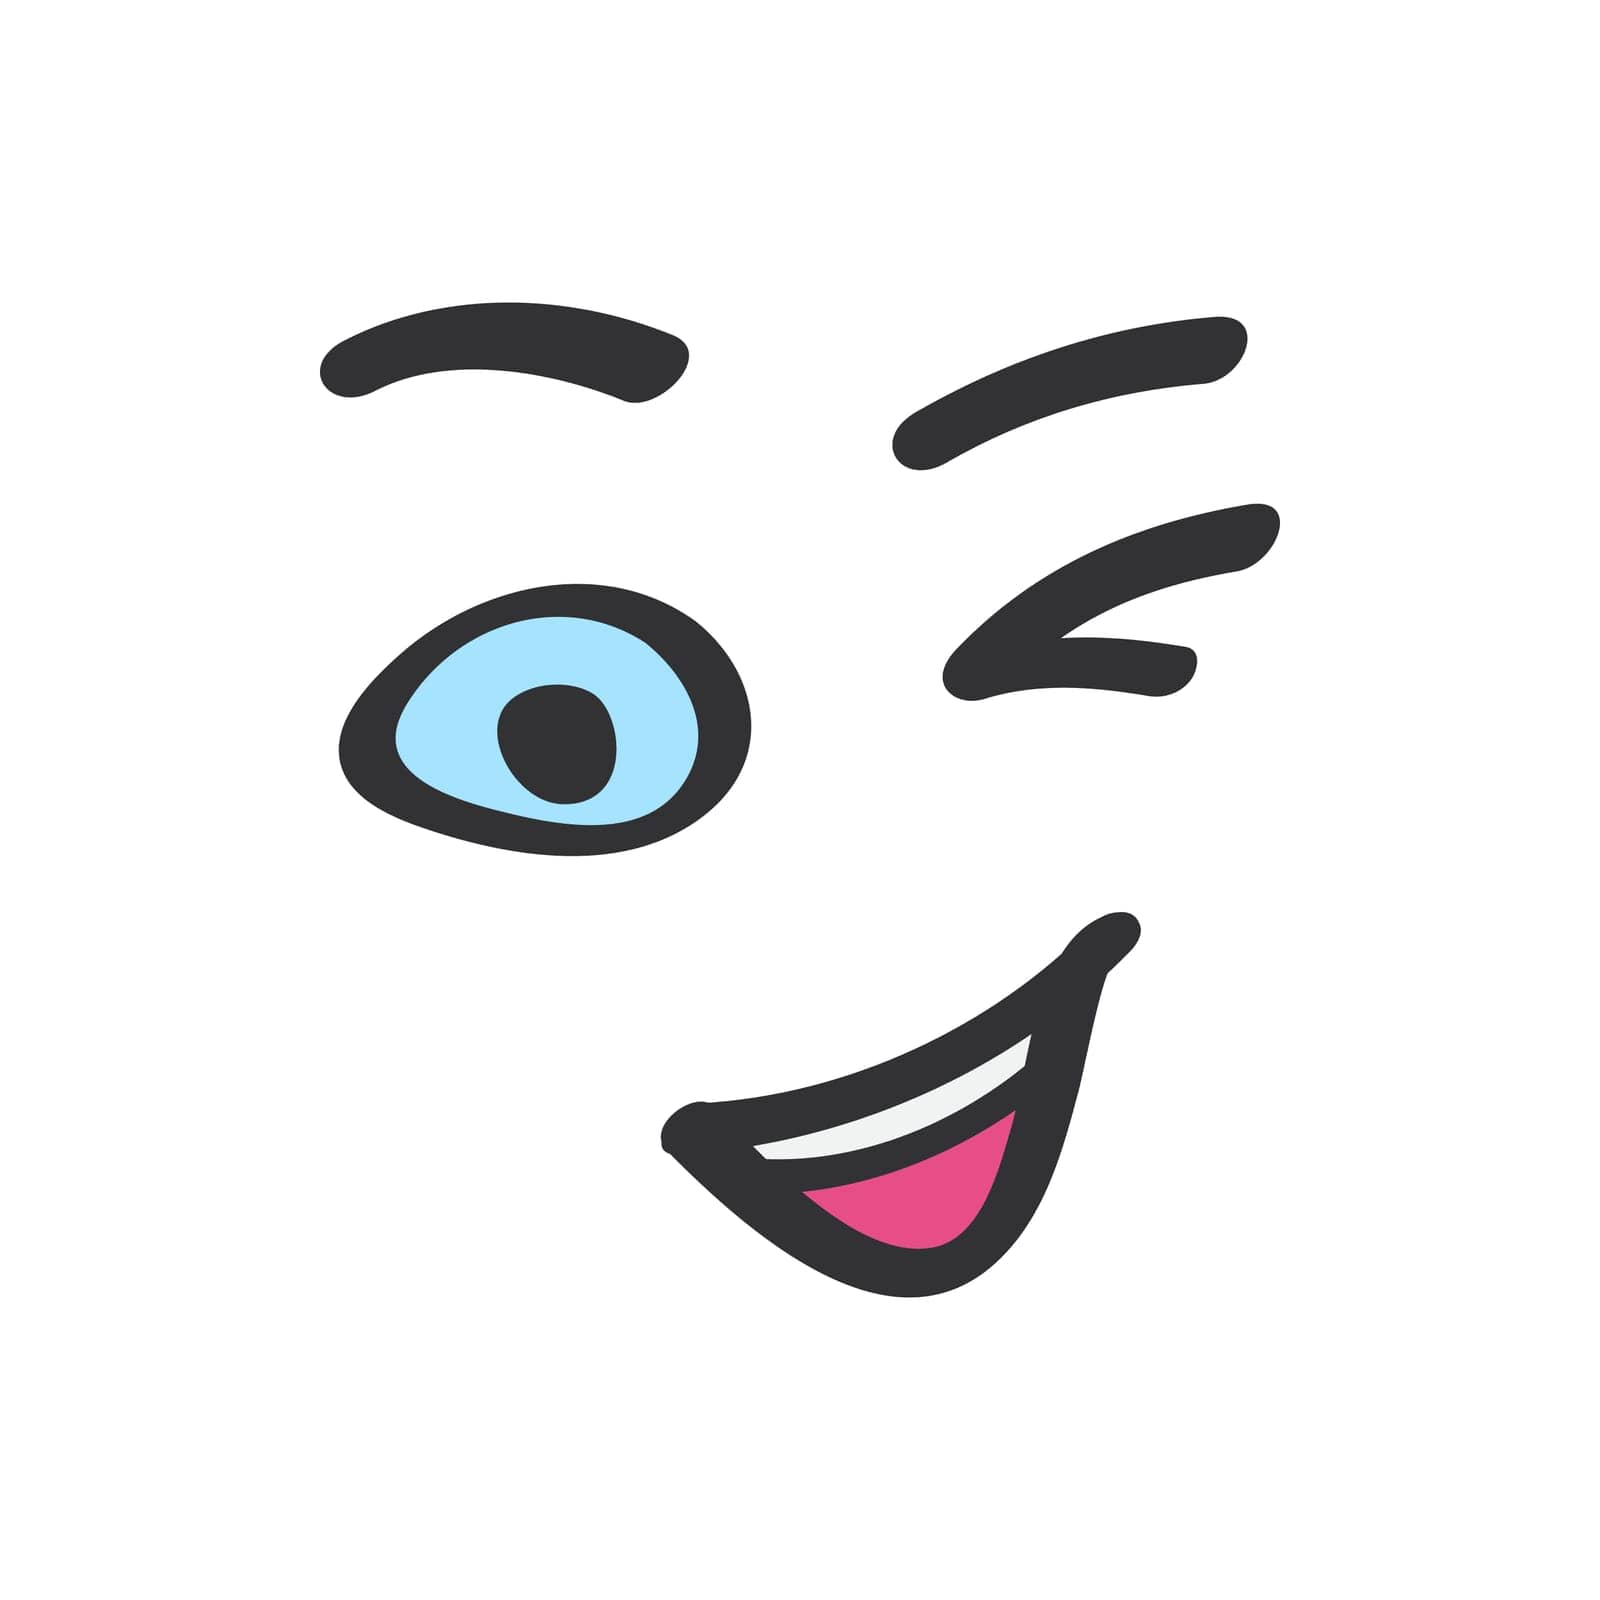 Wink of cute face in doodle style, happy smile and joke of character vector illustration